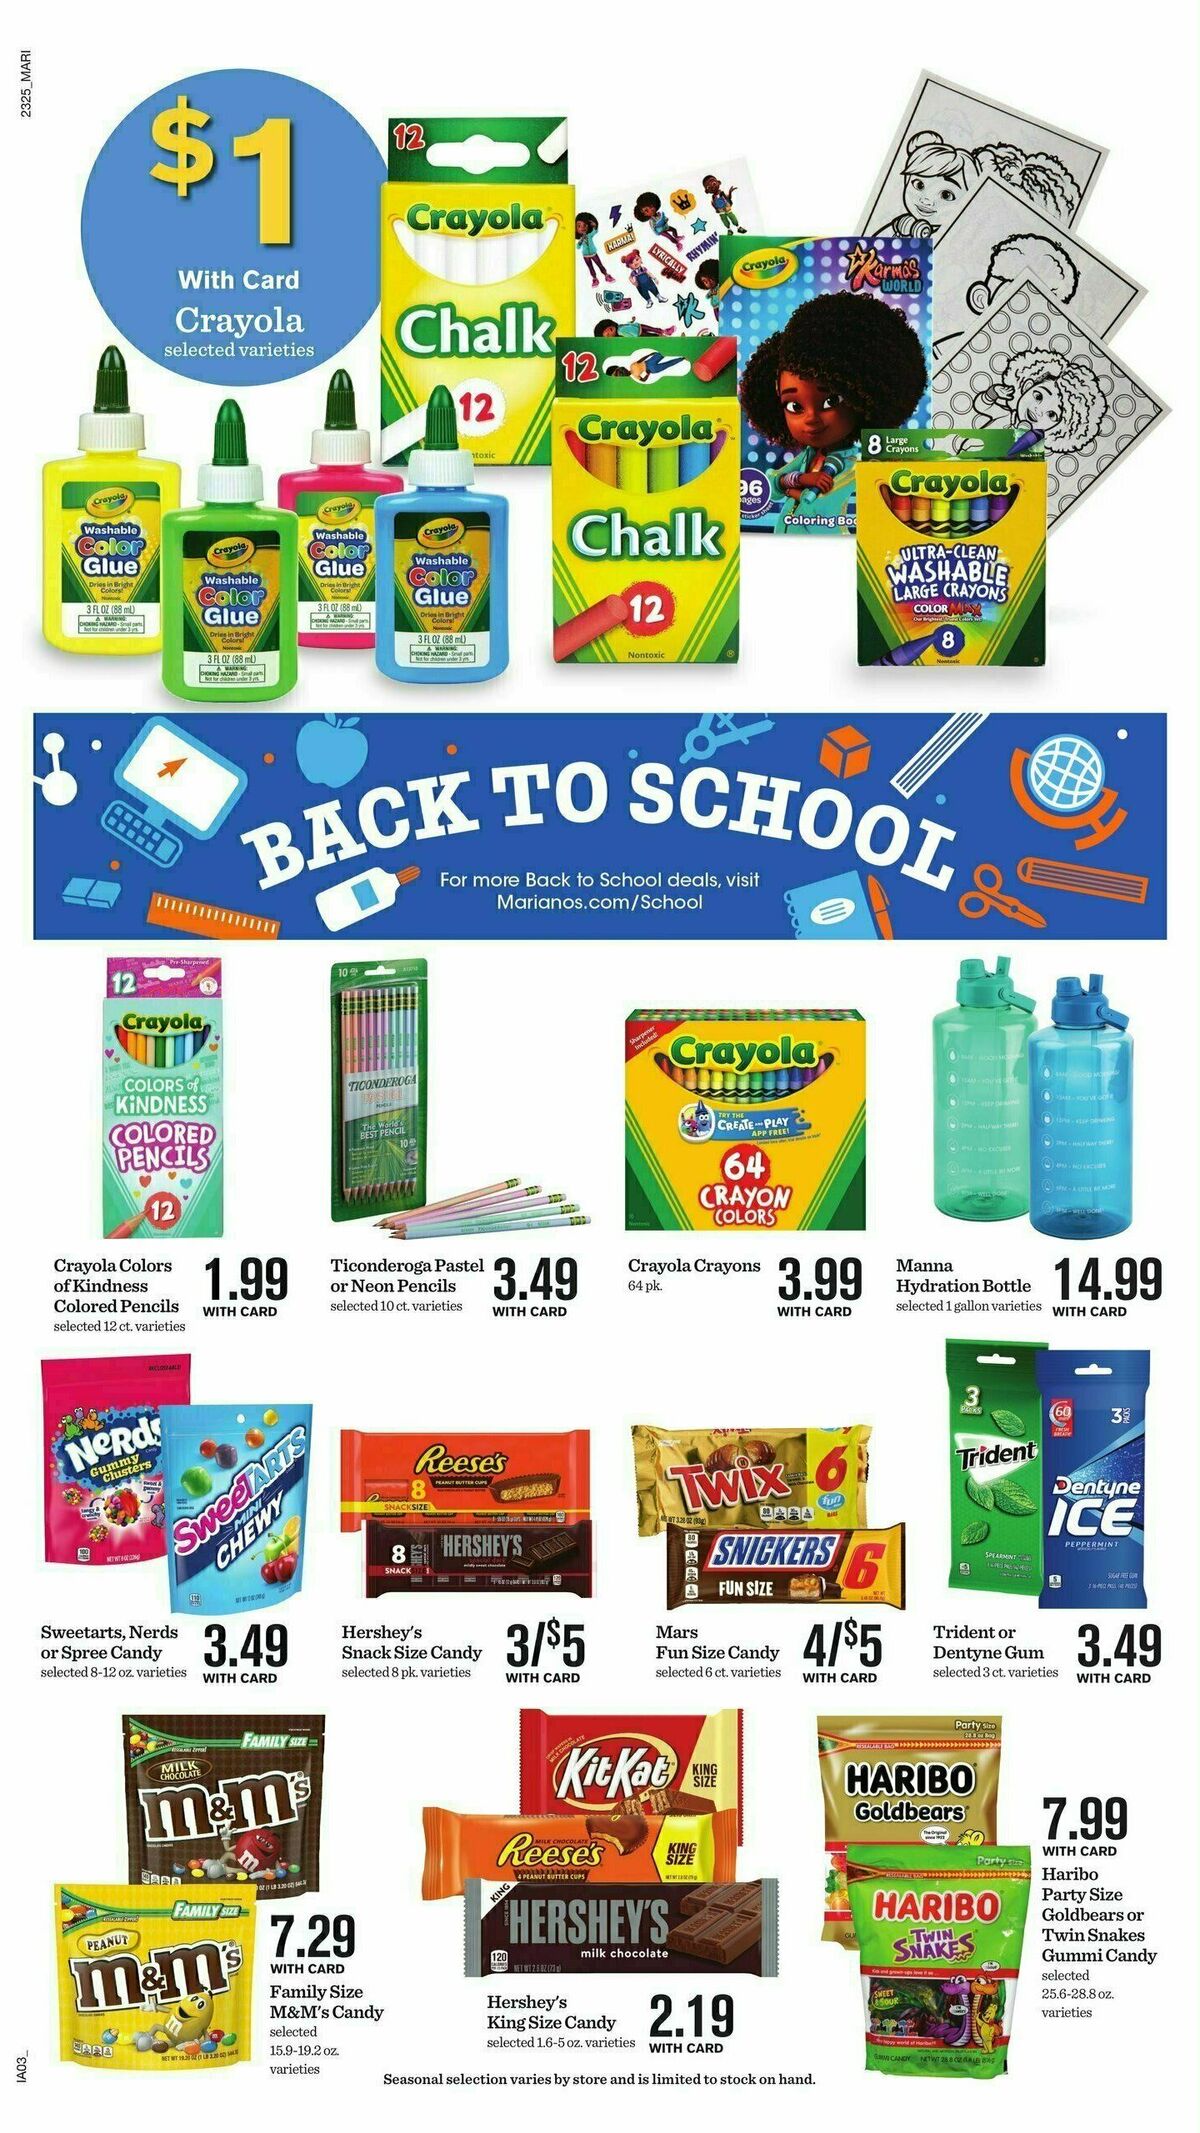 Mariano's Weekly Ad from July 19